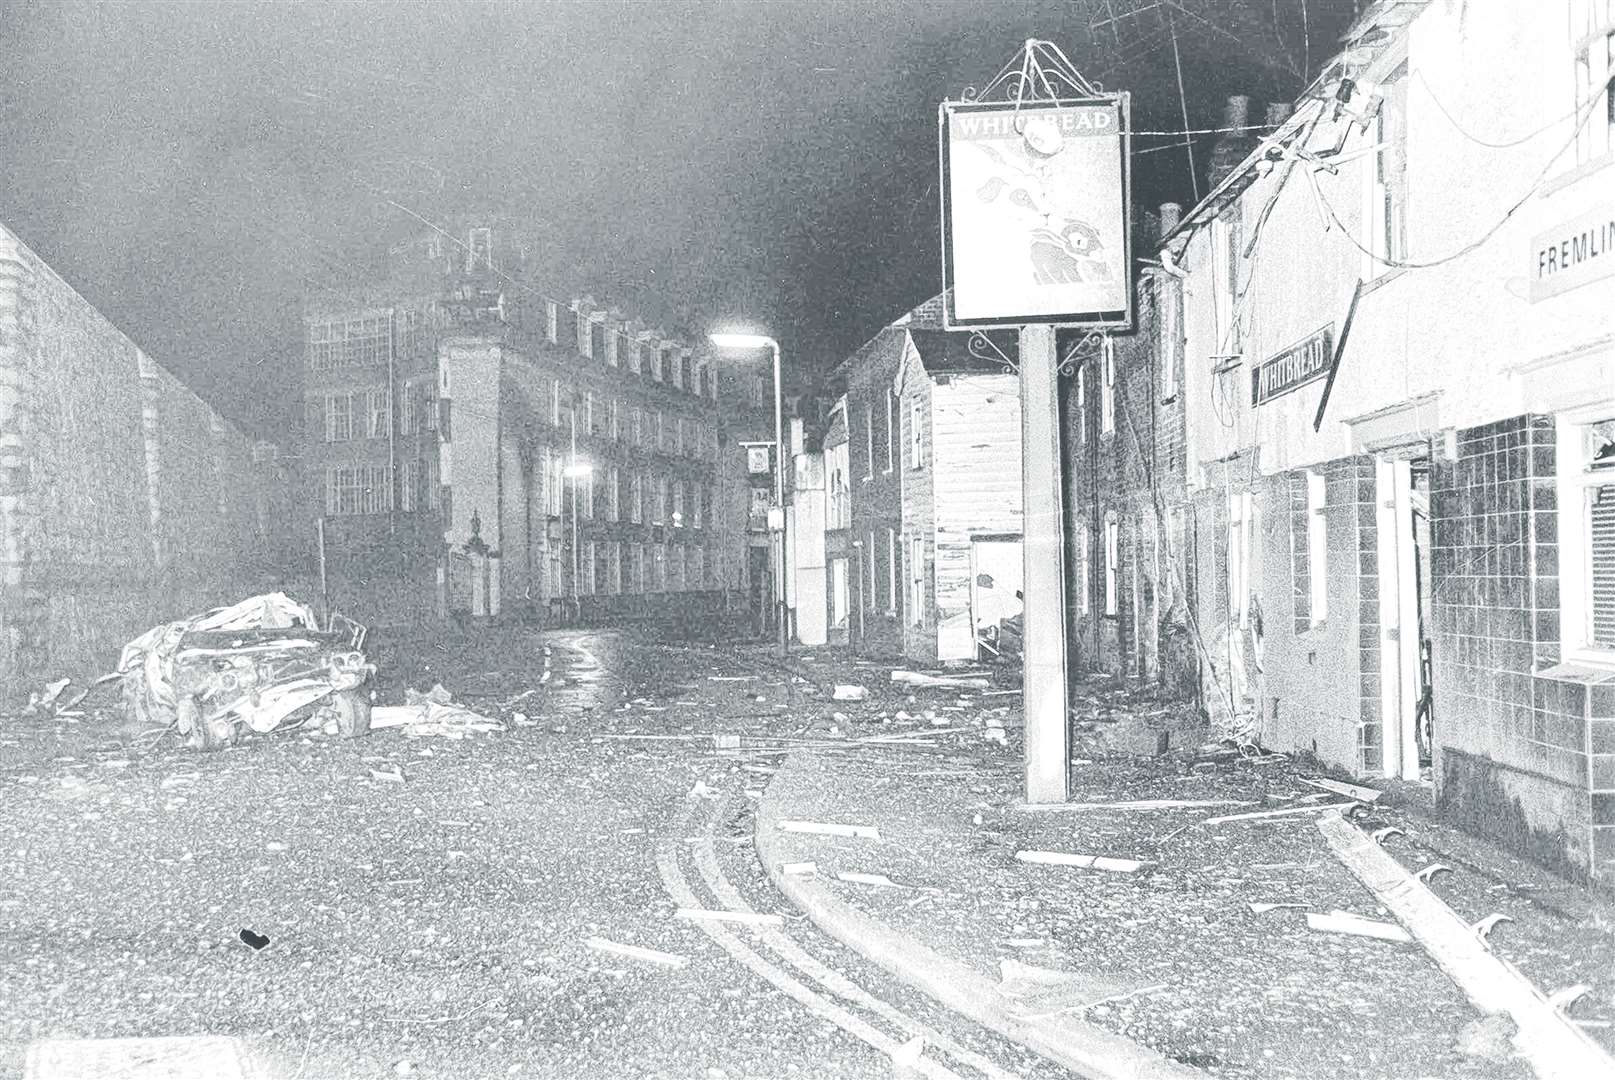 The scene of devastation at the Hare and Hounds pub in 1975